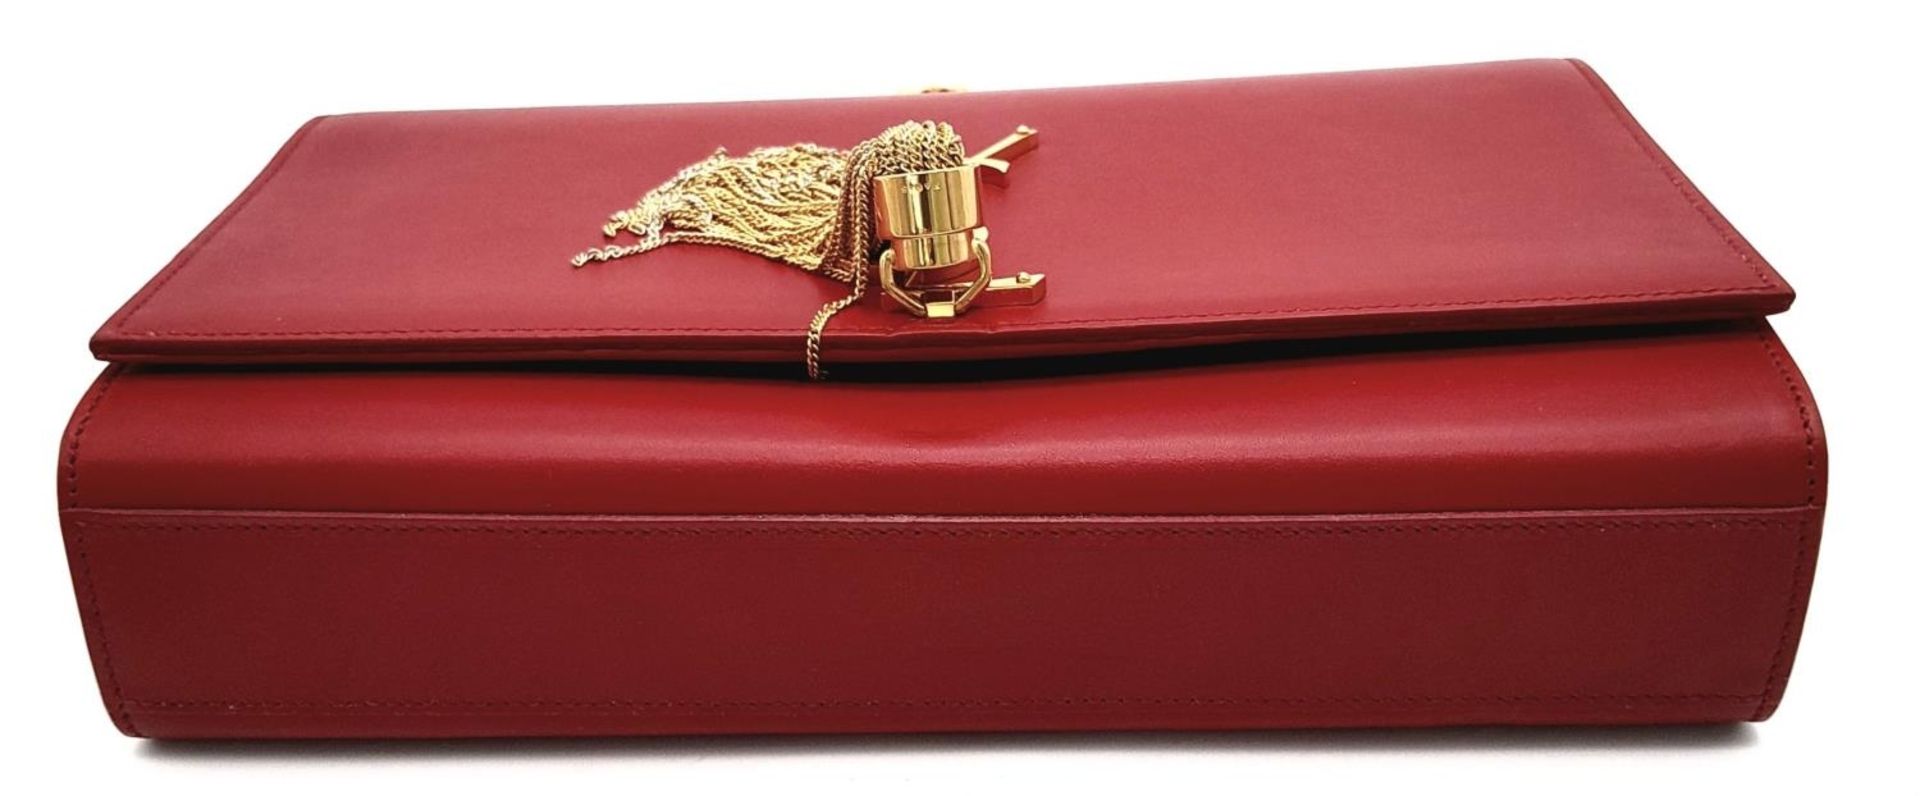 A YSL Red Kate Tassel Crossbody Bag. Leather exterior with gold-toned hardware, the iconic YSL logo, - Bild 5 aus 12